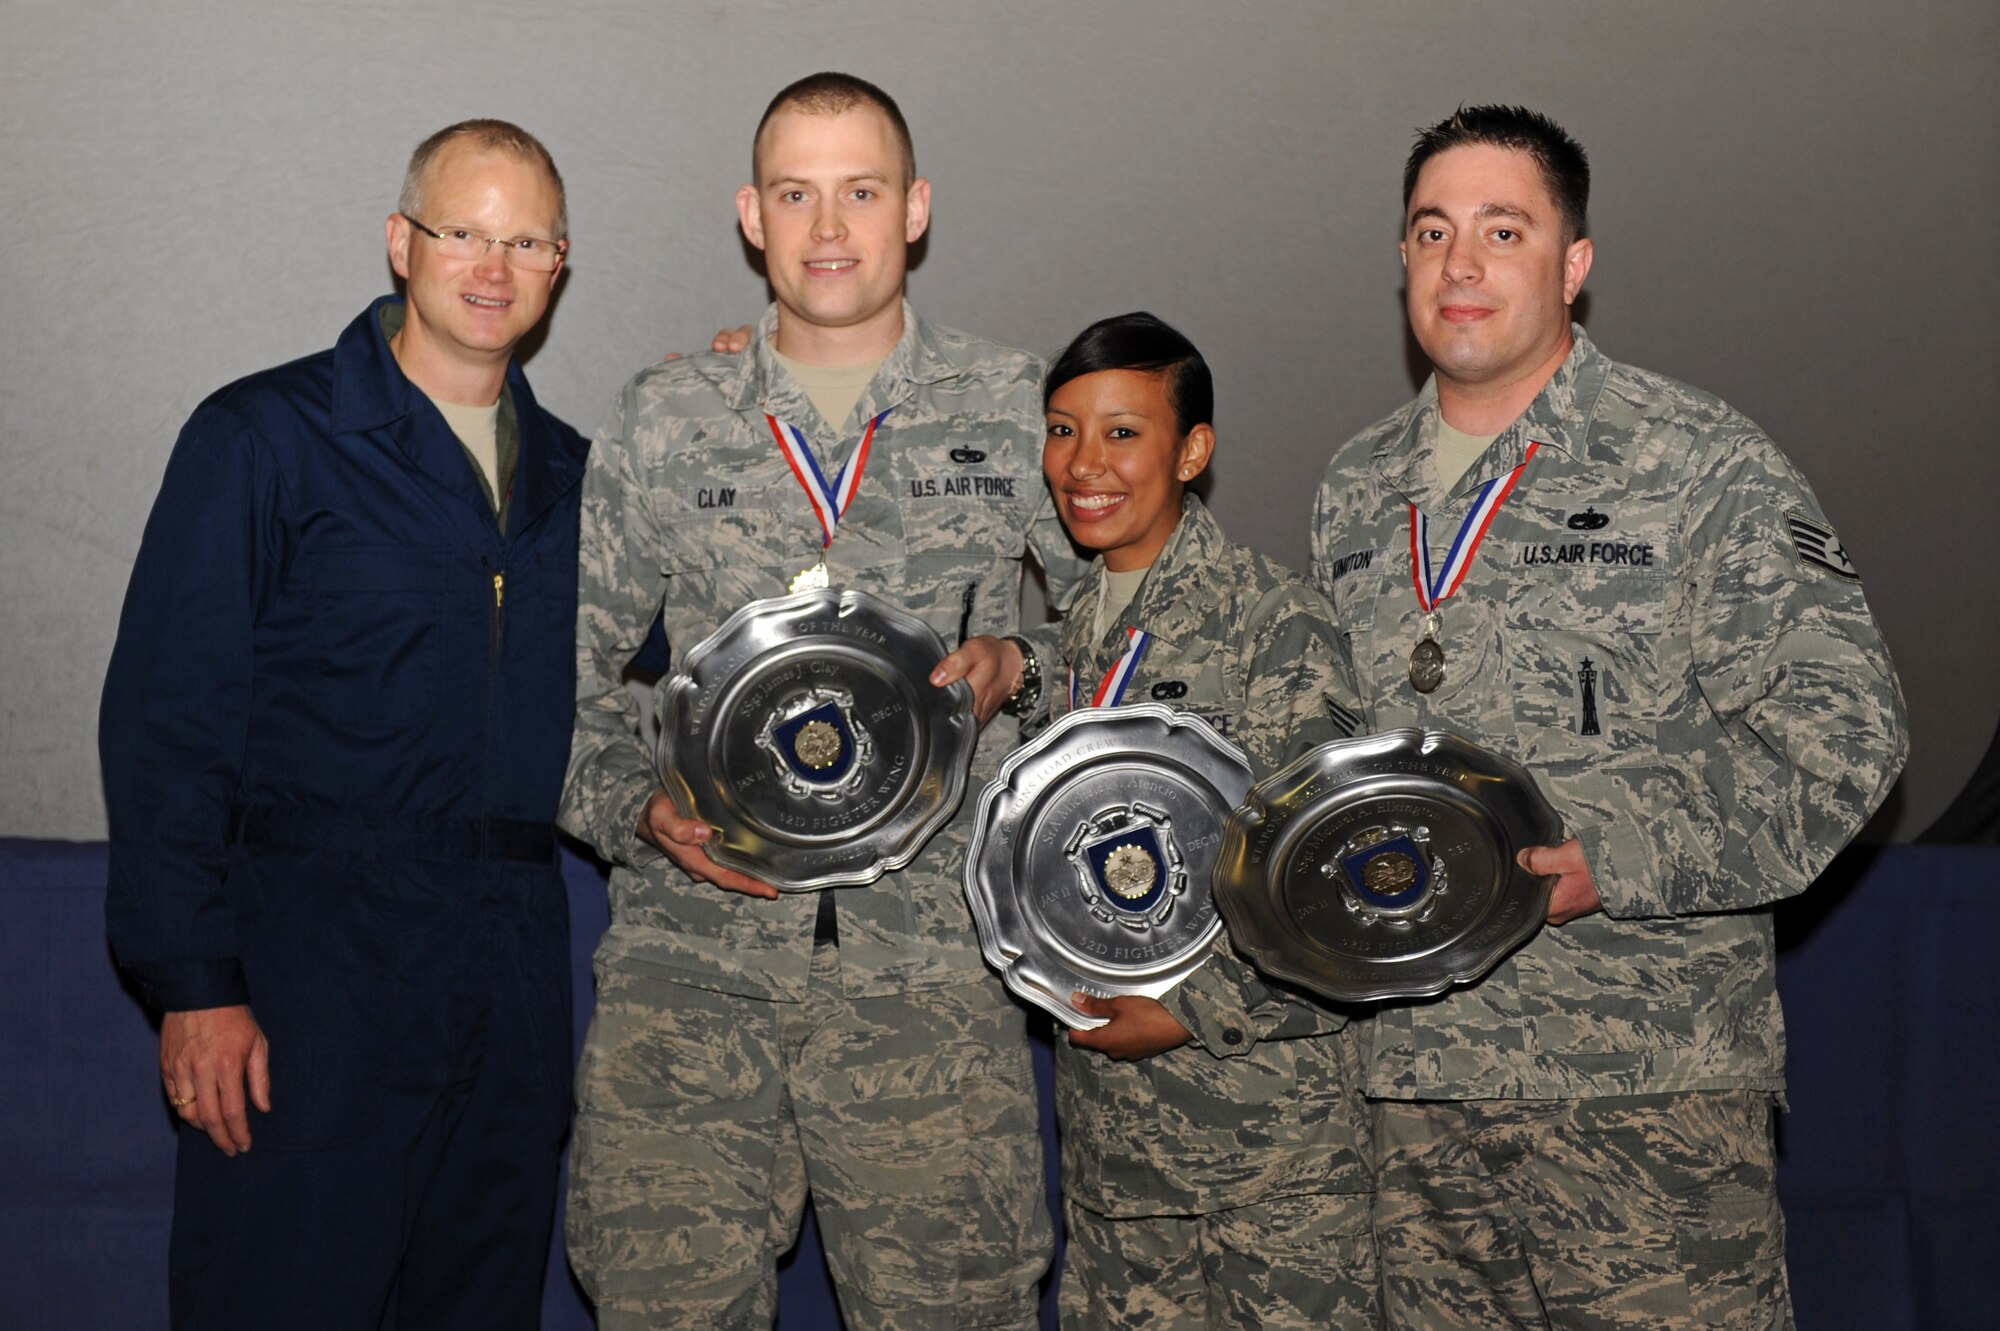 SPANGDAHLEM AIR BASE, Germany – From left, Col. Chris Weggeman, 52nd Fighter Wing commander, and 52nd Aircraft Maintenance Squadron load crew members Staff Sgt. James Clay, Senior Airman Michele Atencio, and Staff Sgt. Michael Elkington, pose for a photo during the 2011 Maintenance Professional of the Year banquet at Hangar 1 here April 21. Clay, Atencio and Elkington were announced as the winners of the 2011 52nd FW Weapons Load Crew of the Year Award during the banquet. Weggeman, wearing coveralls to show support for the maintainers, joined Airmen from the 52nd Maintenance Group and 52nd Munitions Maintenance Group attending the banquet to recognize contribution made by maintenance professionals to mission readiness throughout the year. The banquet also included awards for Airmen and teams who went above and the beyond the established standards for their job performance. (U.S. Air Force photo by Airman 1st Class Matthew B. Fredericks/Released)